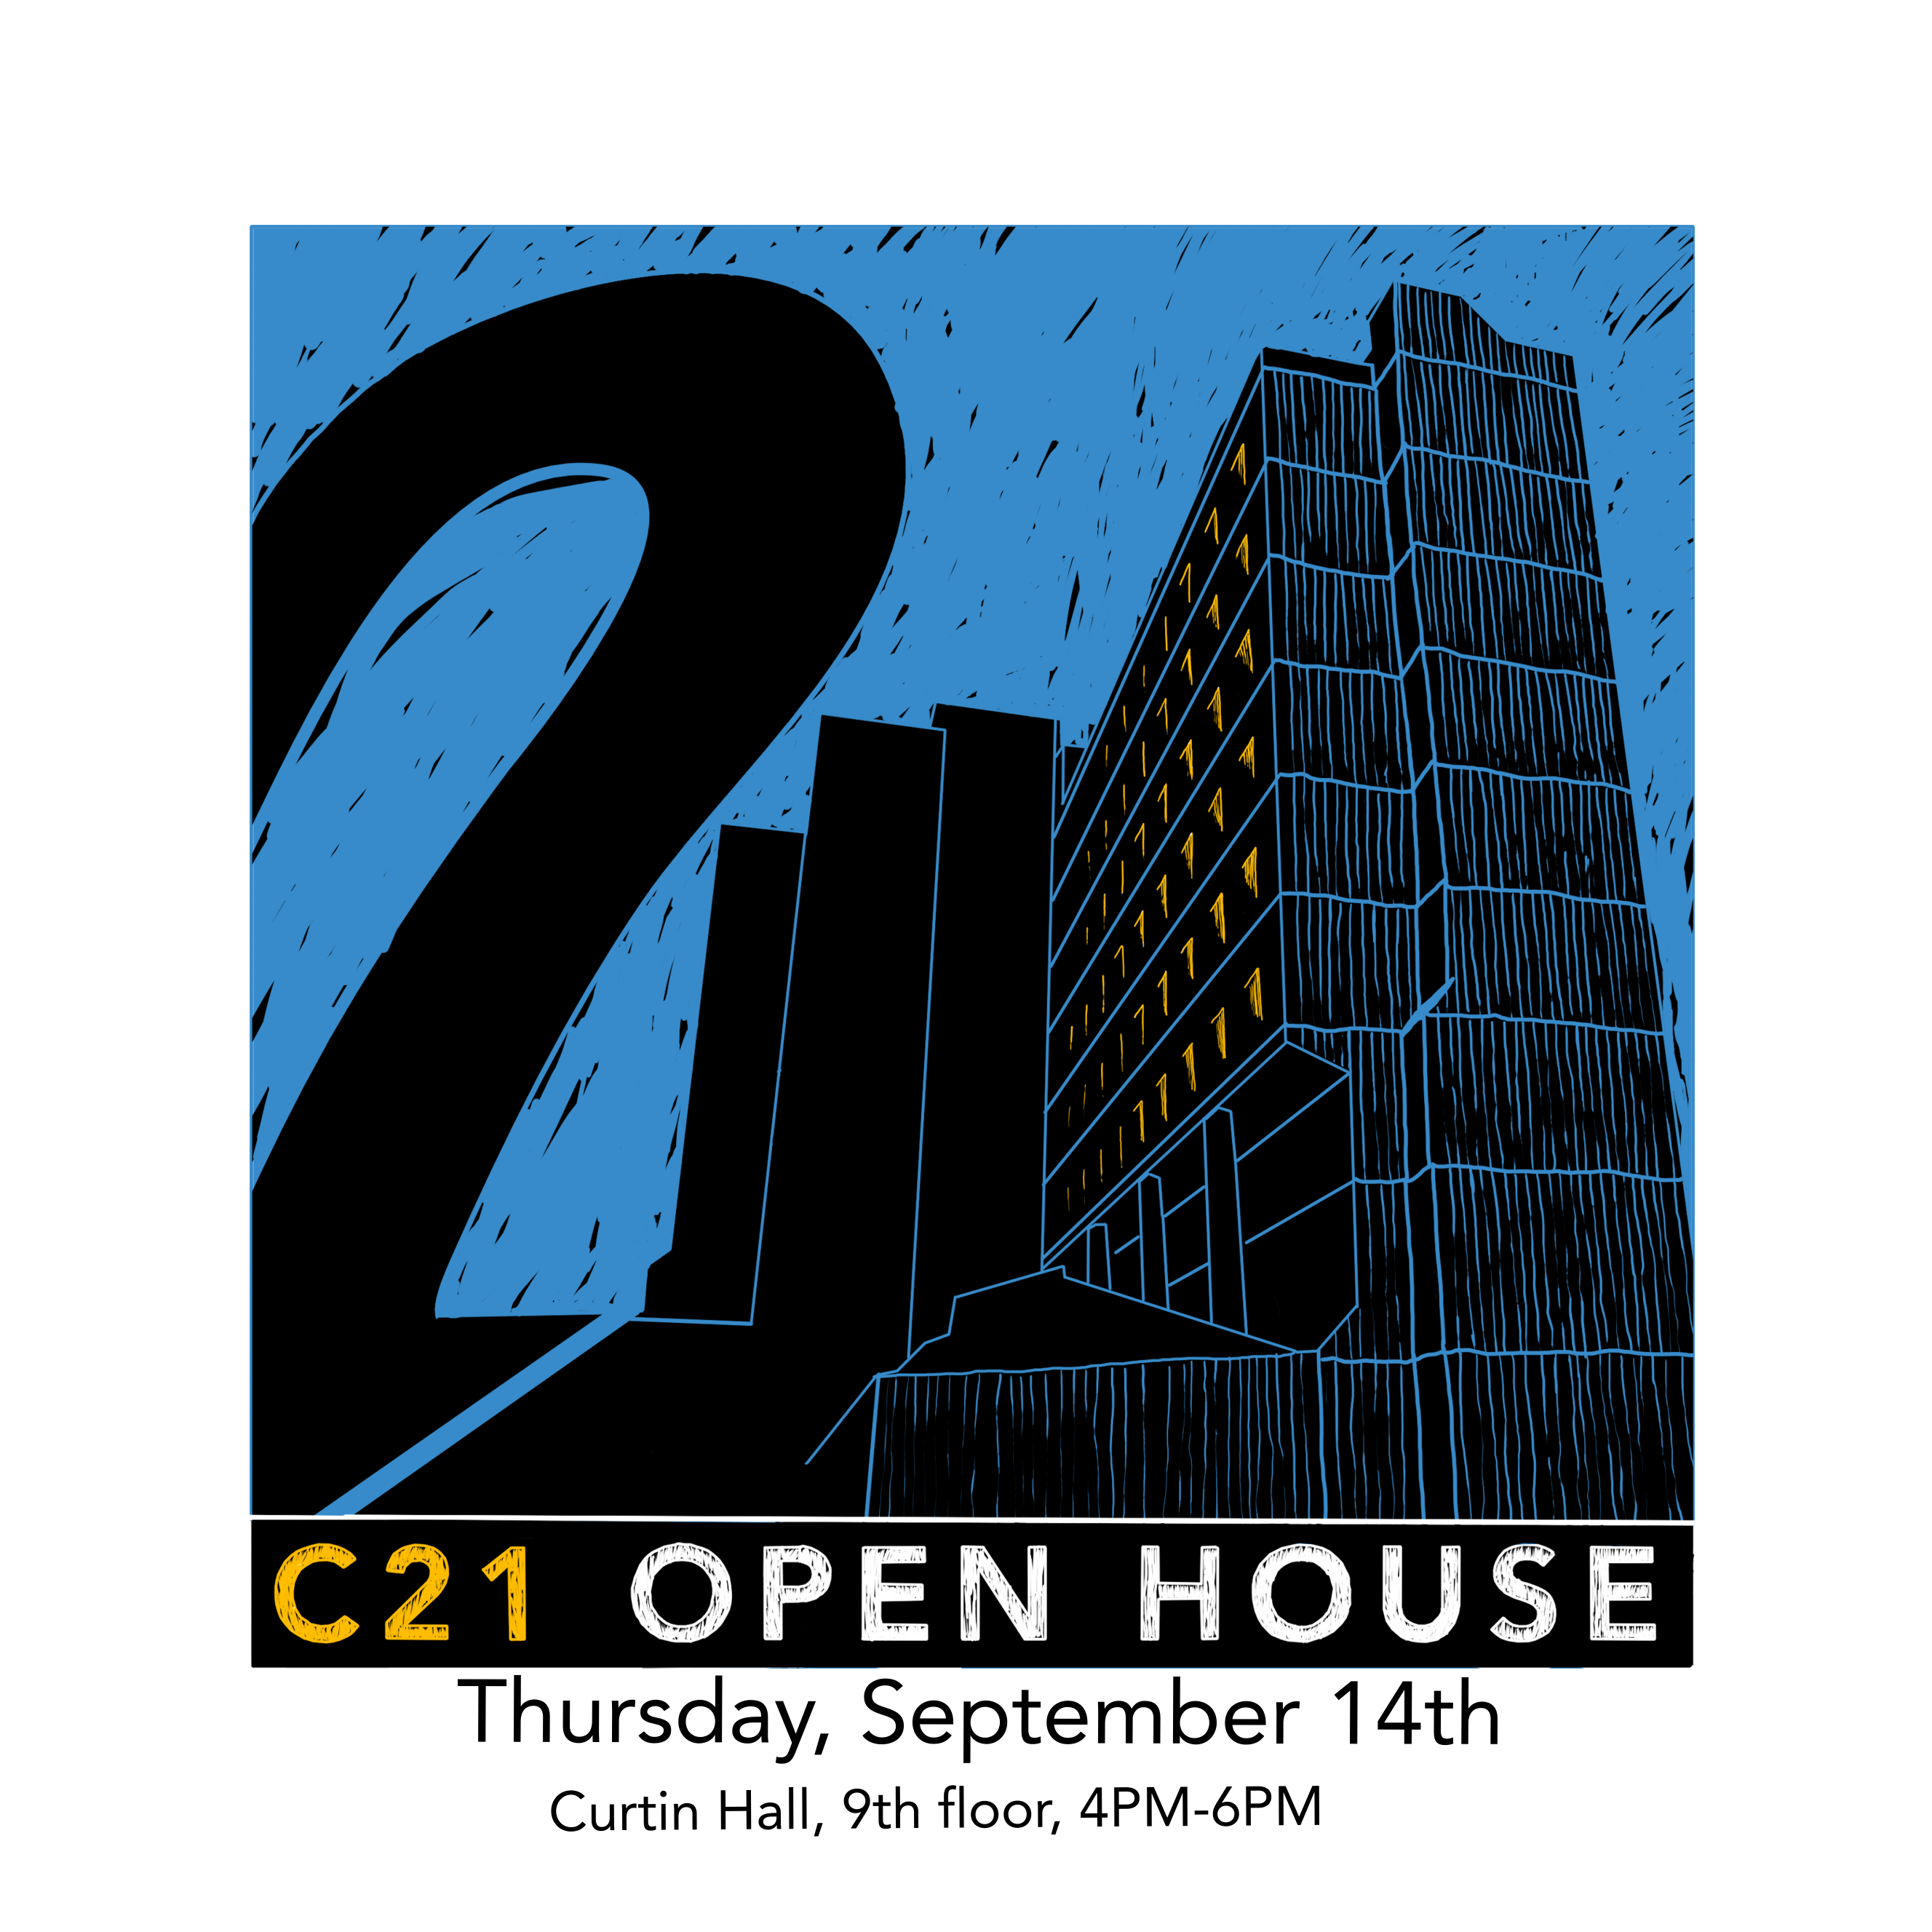 Block print of 21 logo with C21 Open House title